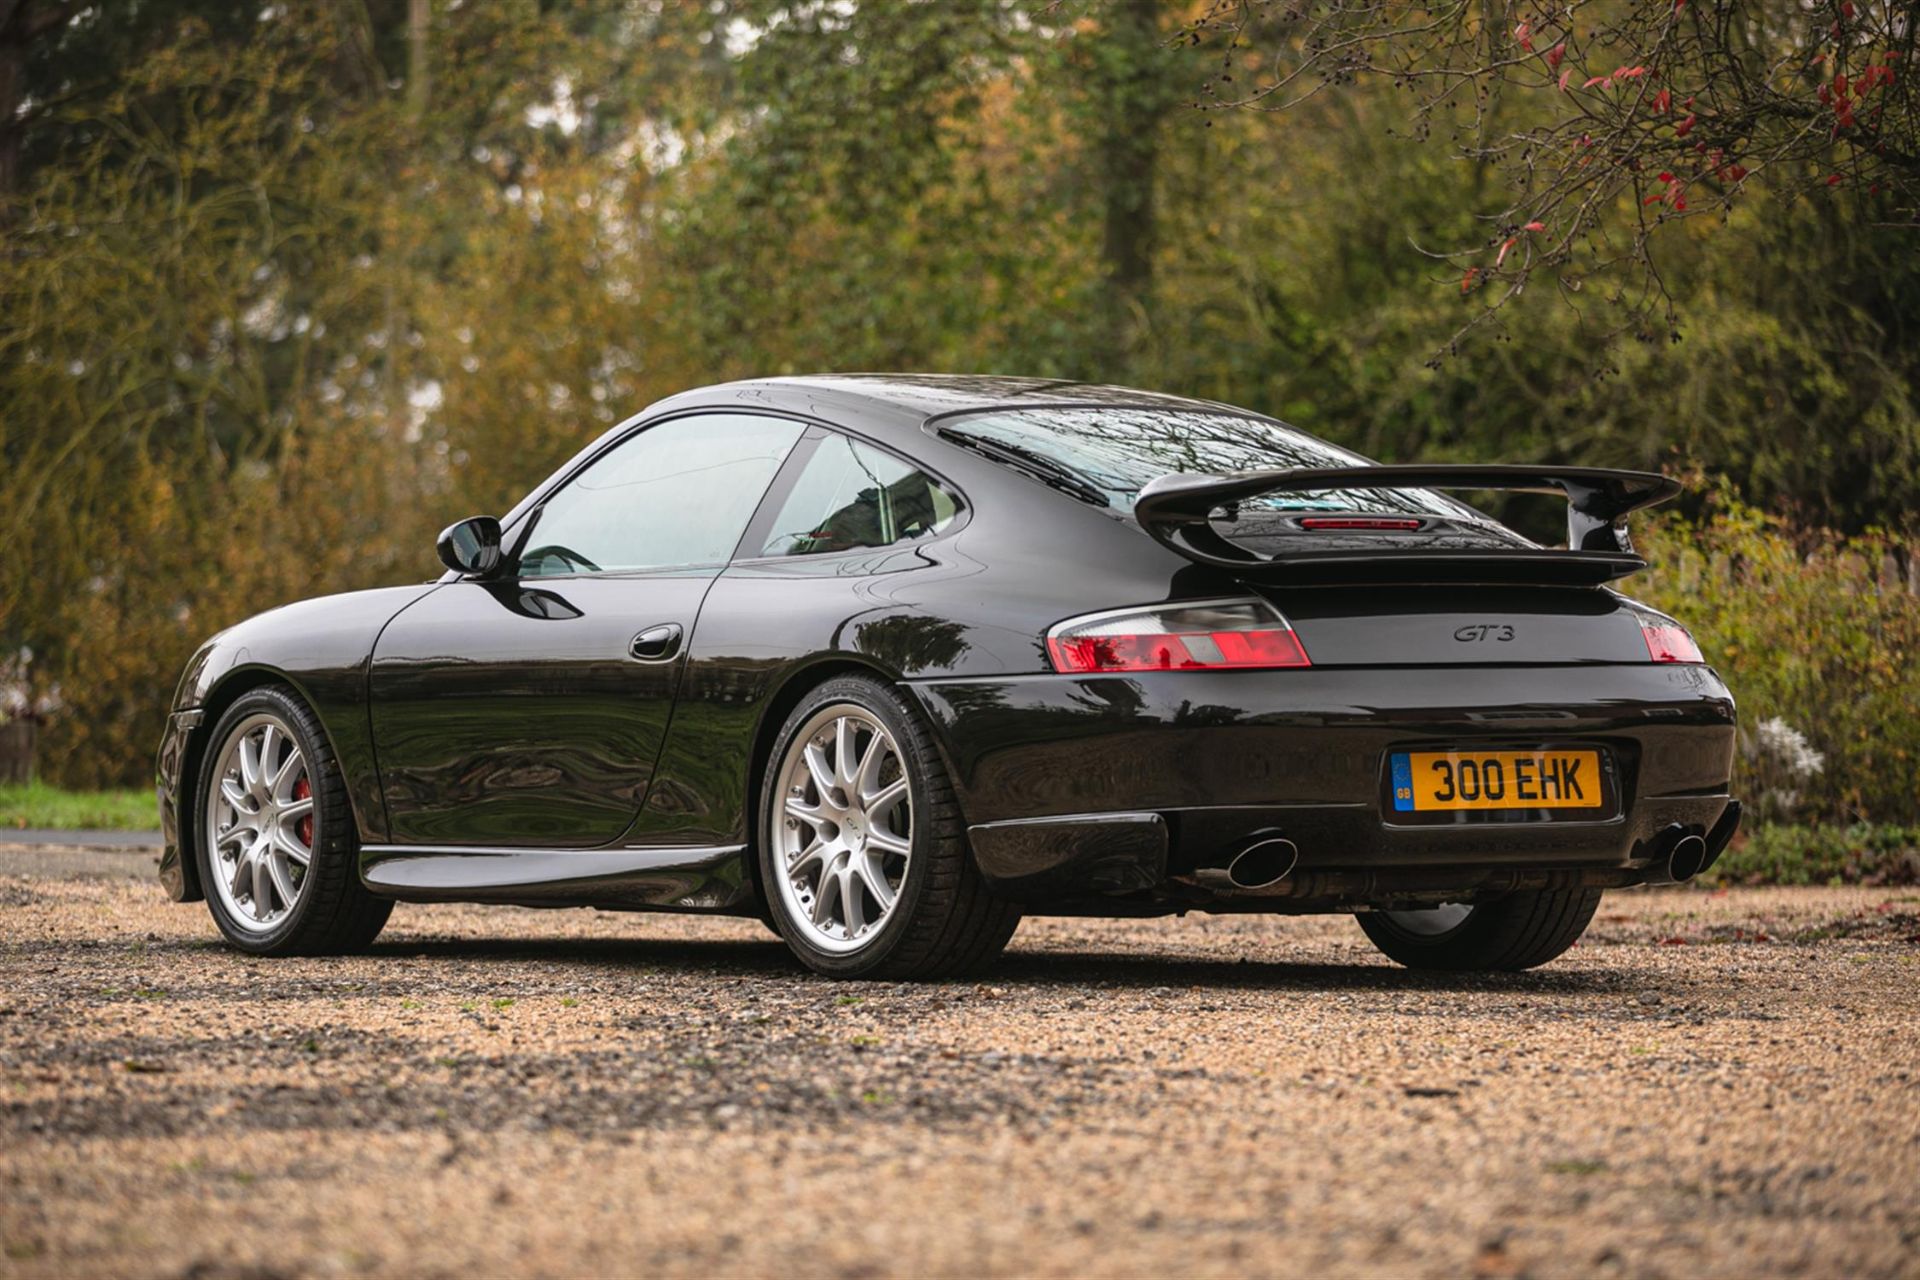 1999 Porsche 911 (996) Carrera (X51) with factory GT3 options - Image 4 of 10